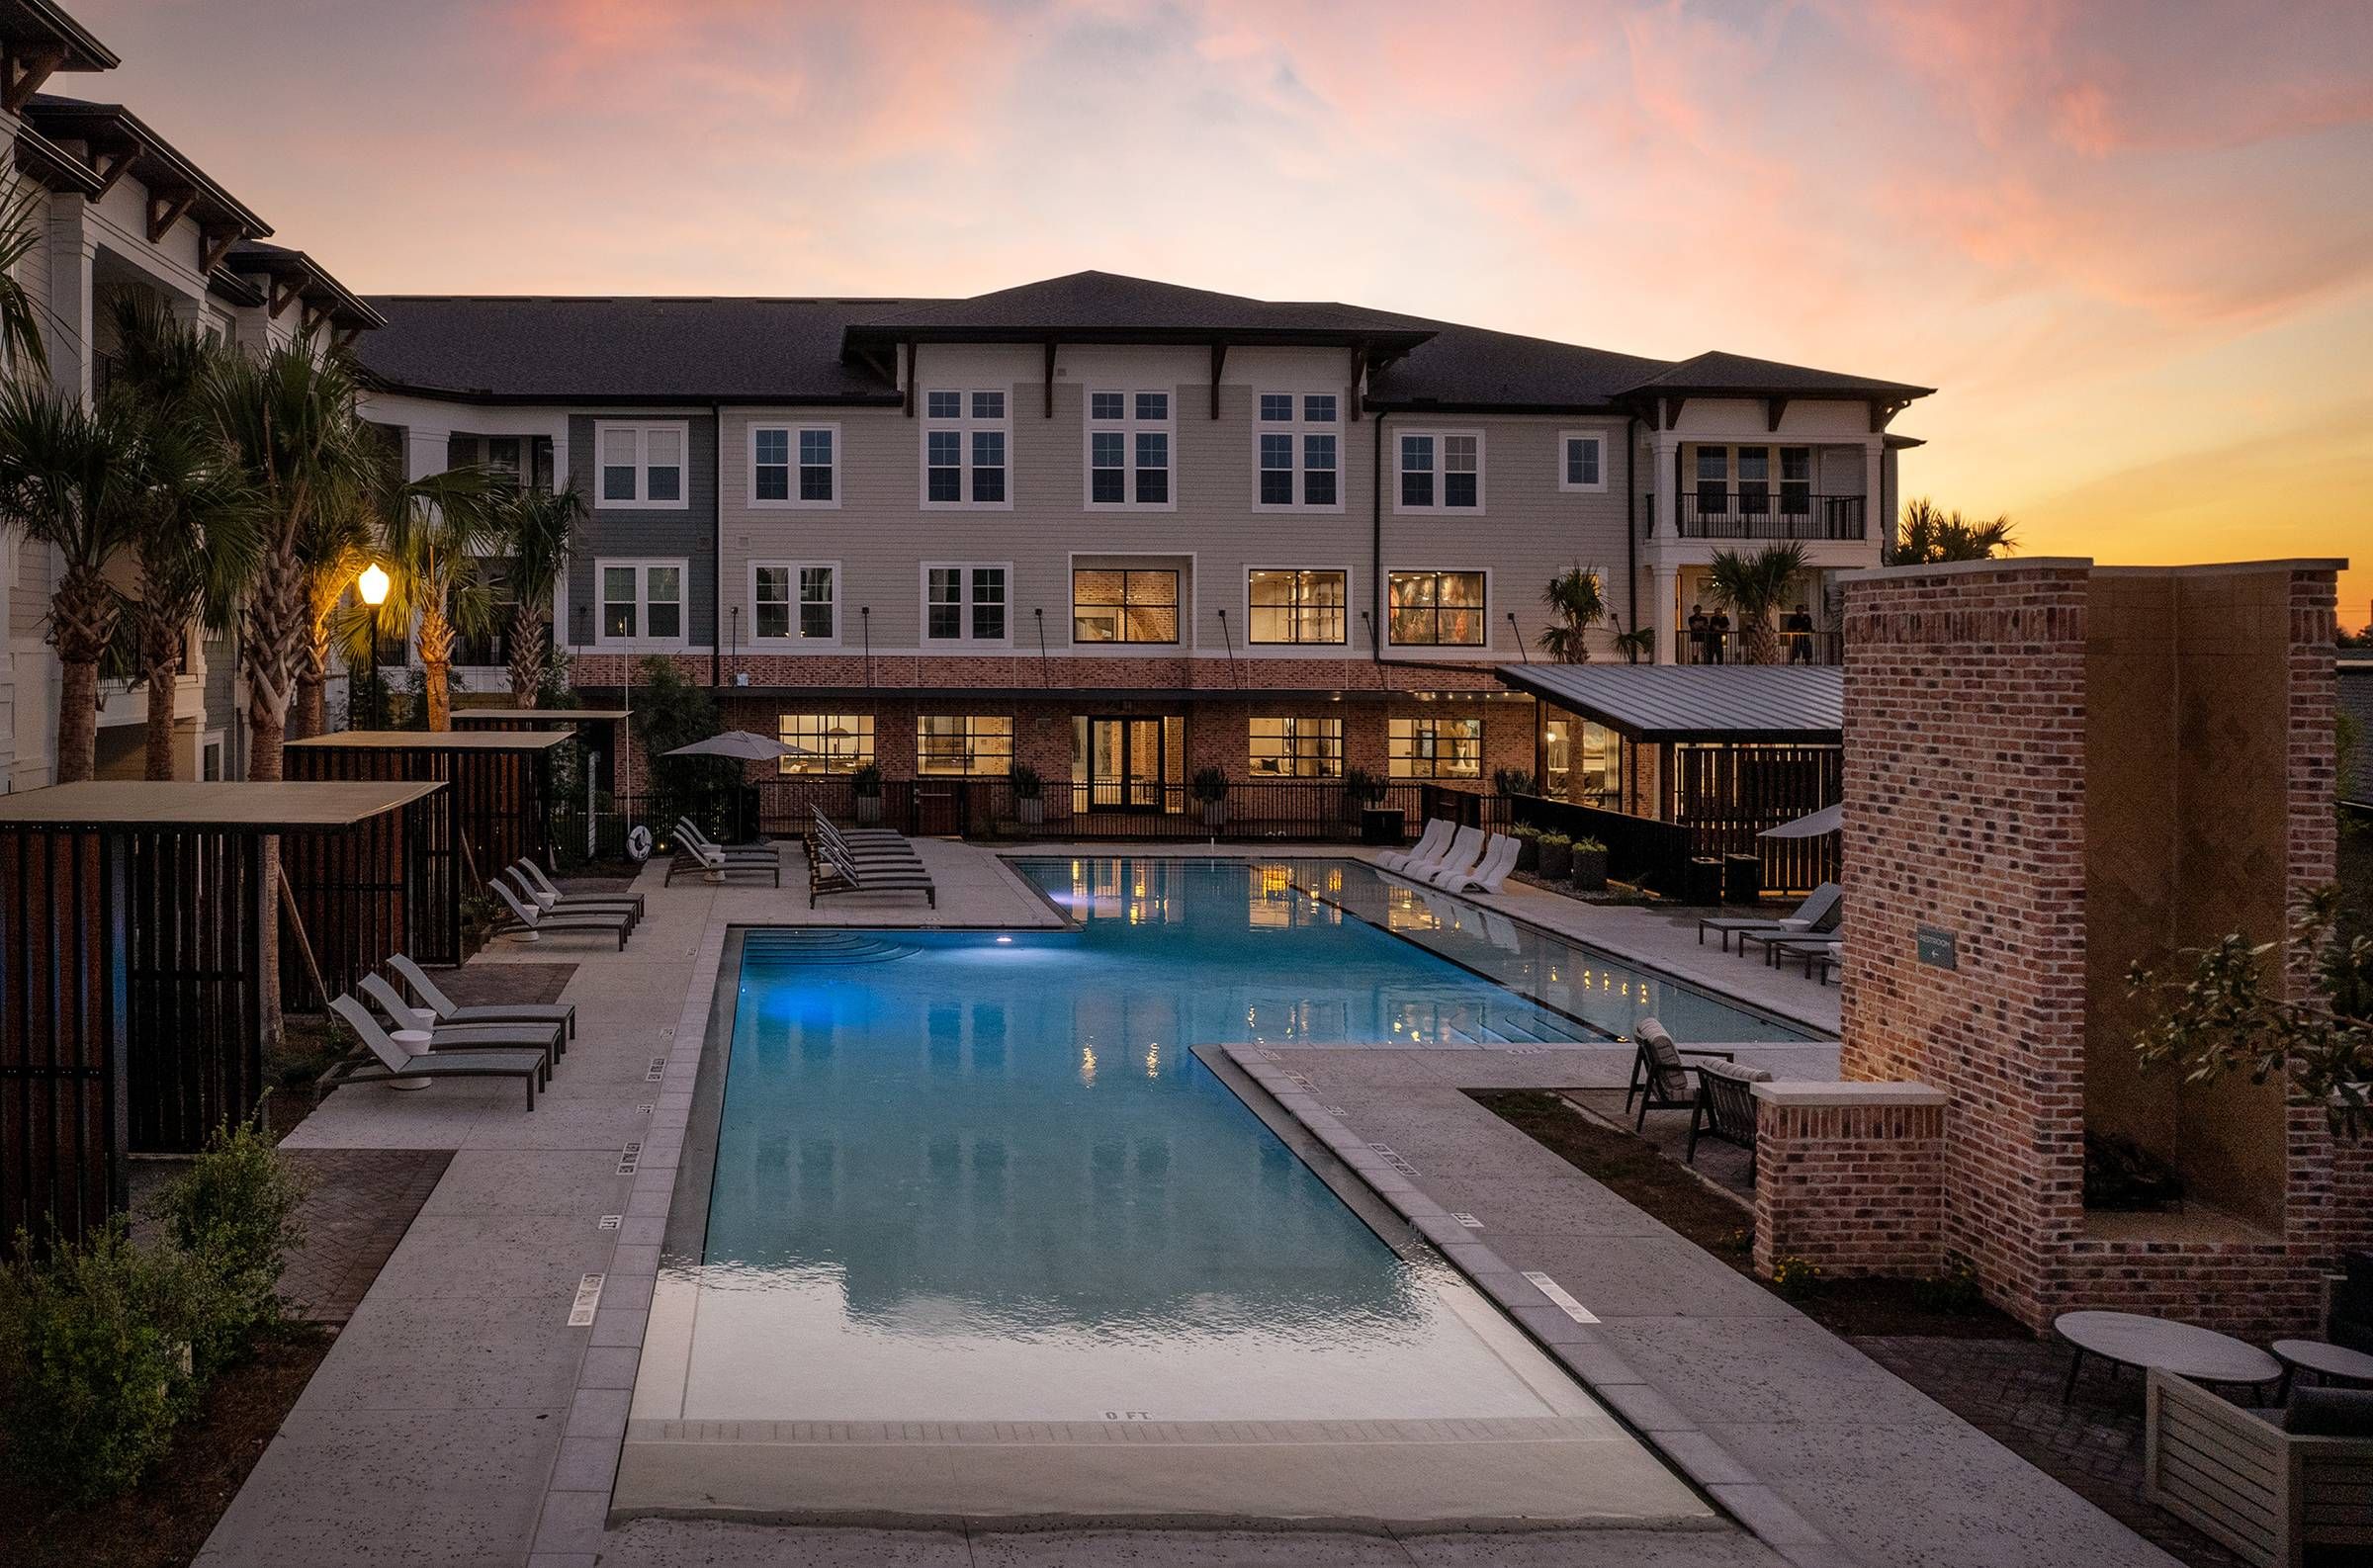 Alta Winter Garden's communal pool area captured at dusk, highlighting the pool's reflective water and the surrounding relaxation spaces.